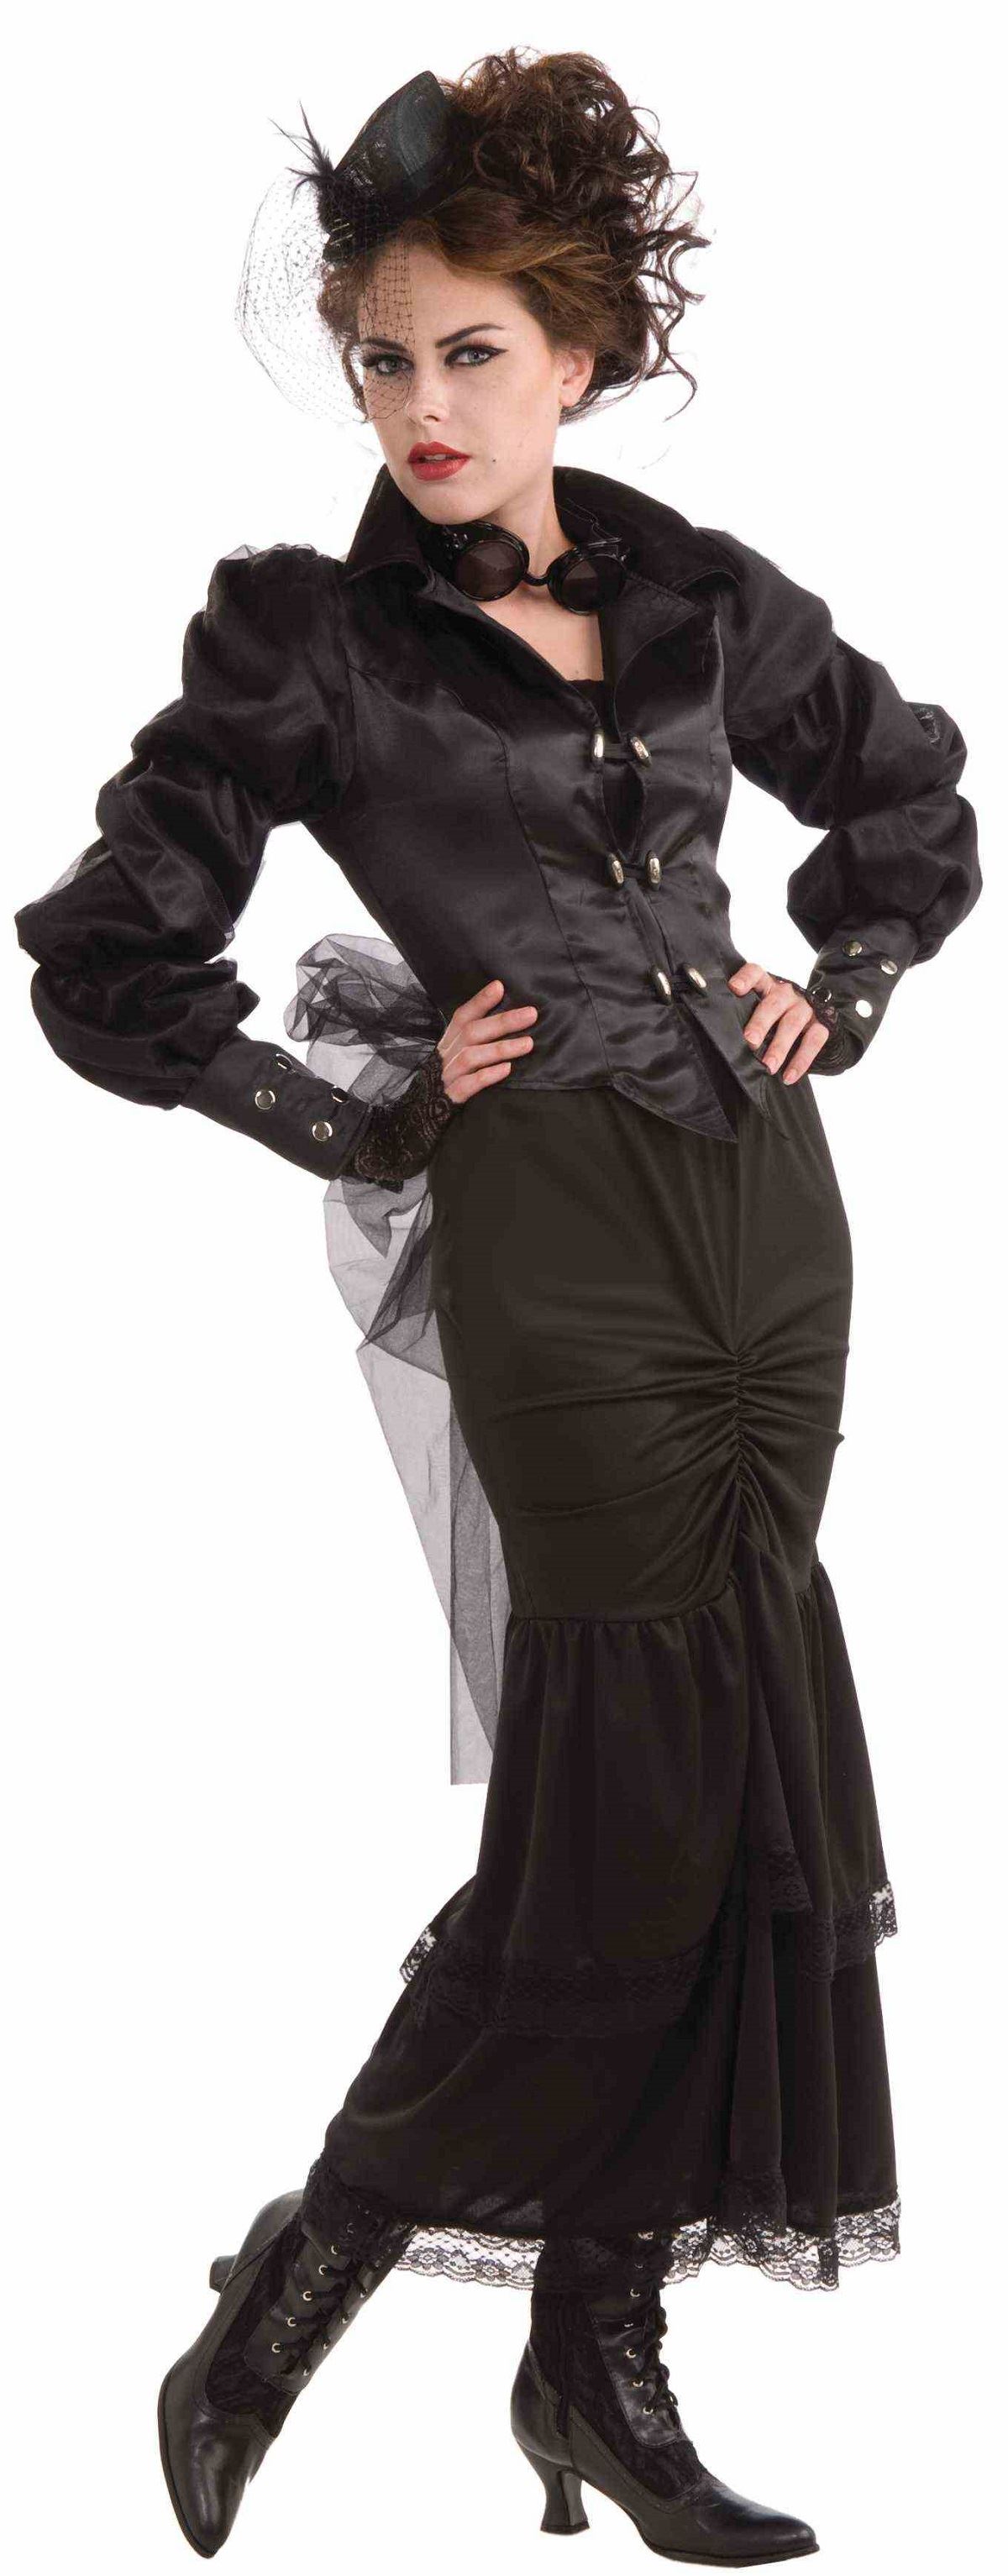 Adult Steampunk Victorian Lady Woman Costume 34 99 The Costume Land